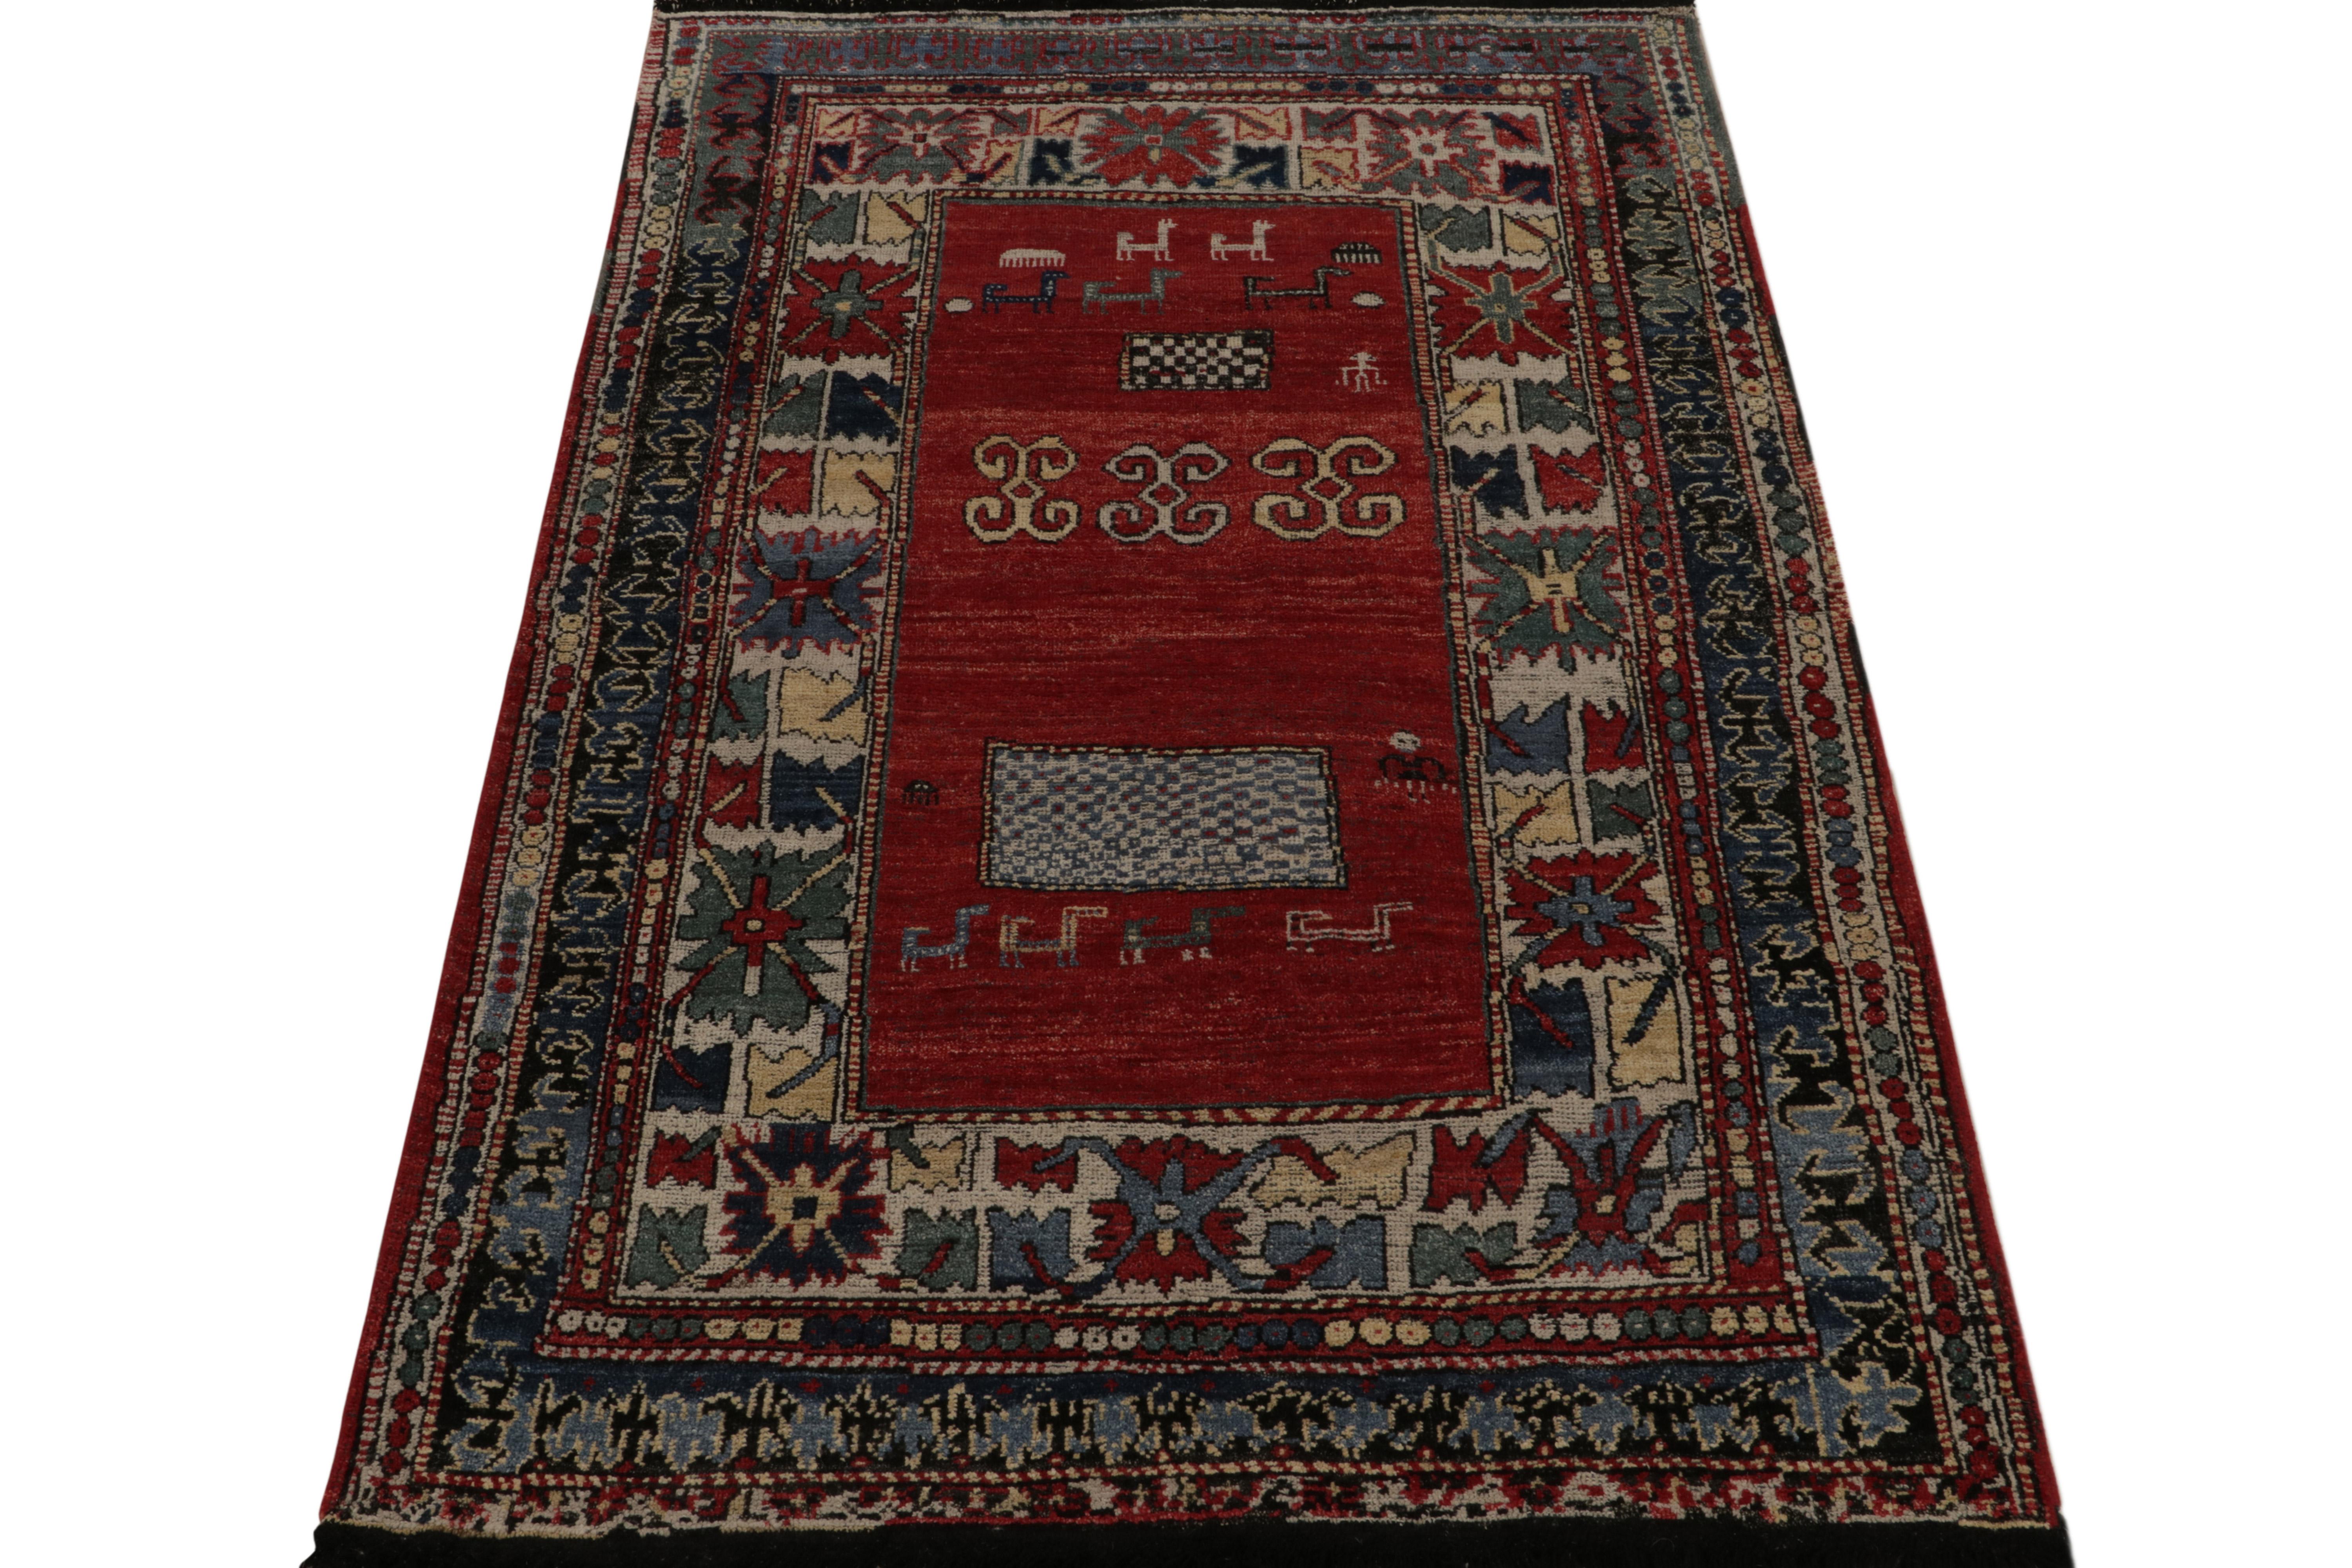 Indian Rug & Kilim’s Antique Turkmen Style Rug in Red with Blue & Gold Tribal Patterns For Sale